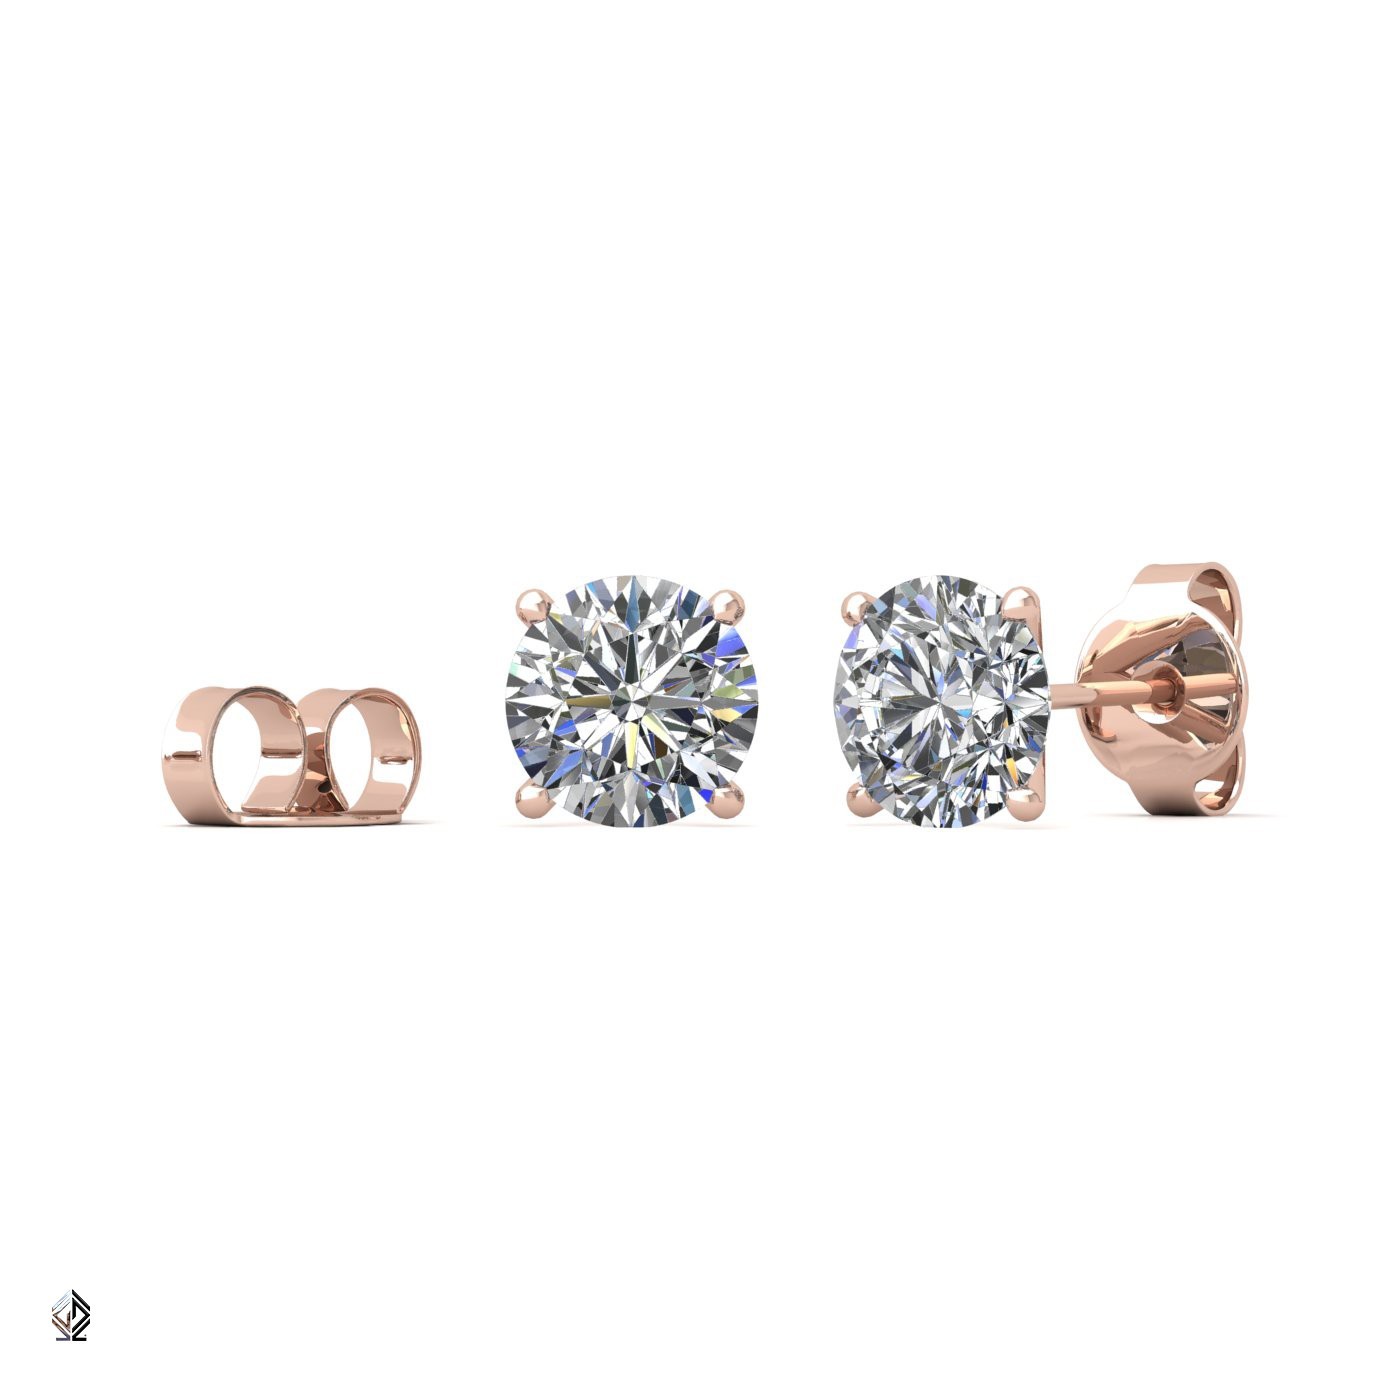 18k yellow gold 0,5 ct 4 prongs round cut classic diamond earring studs Photos & images